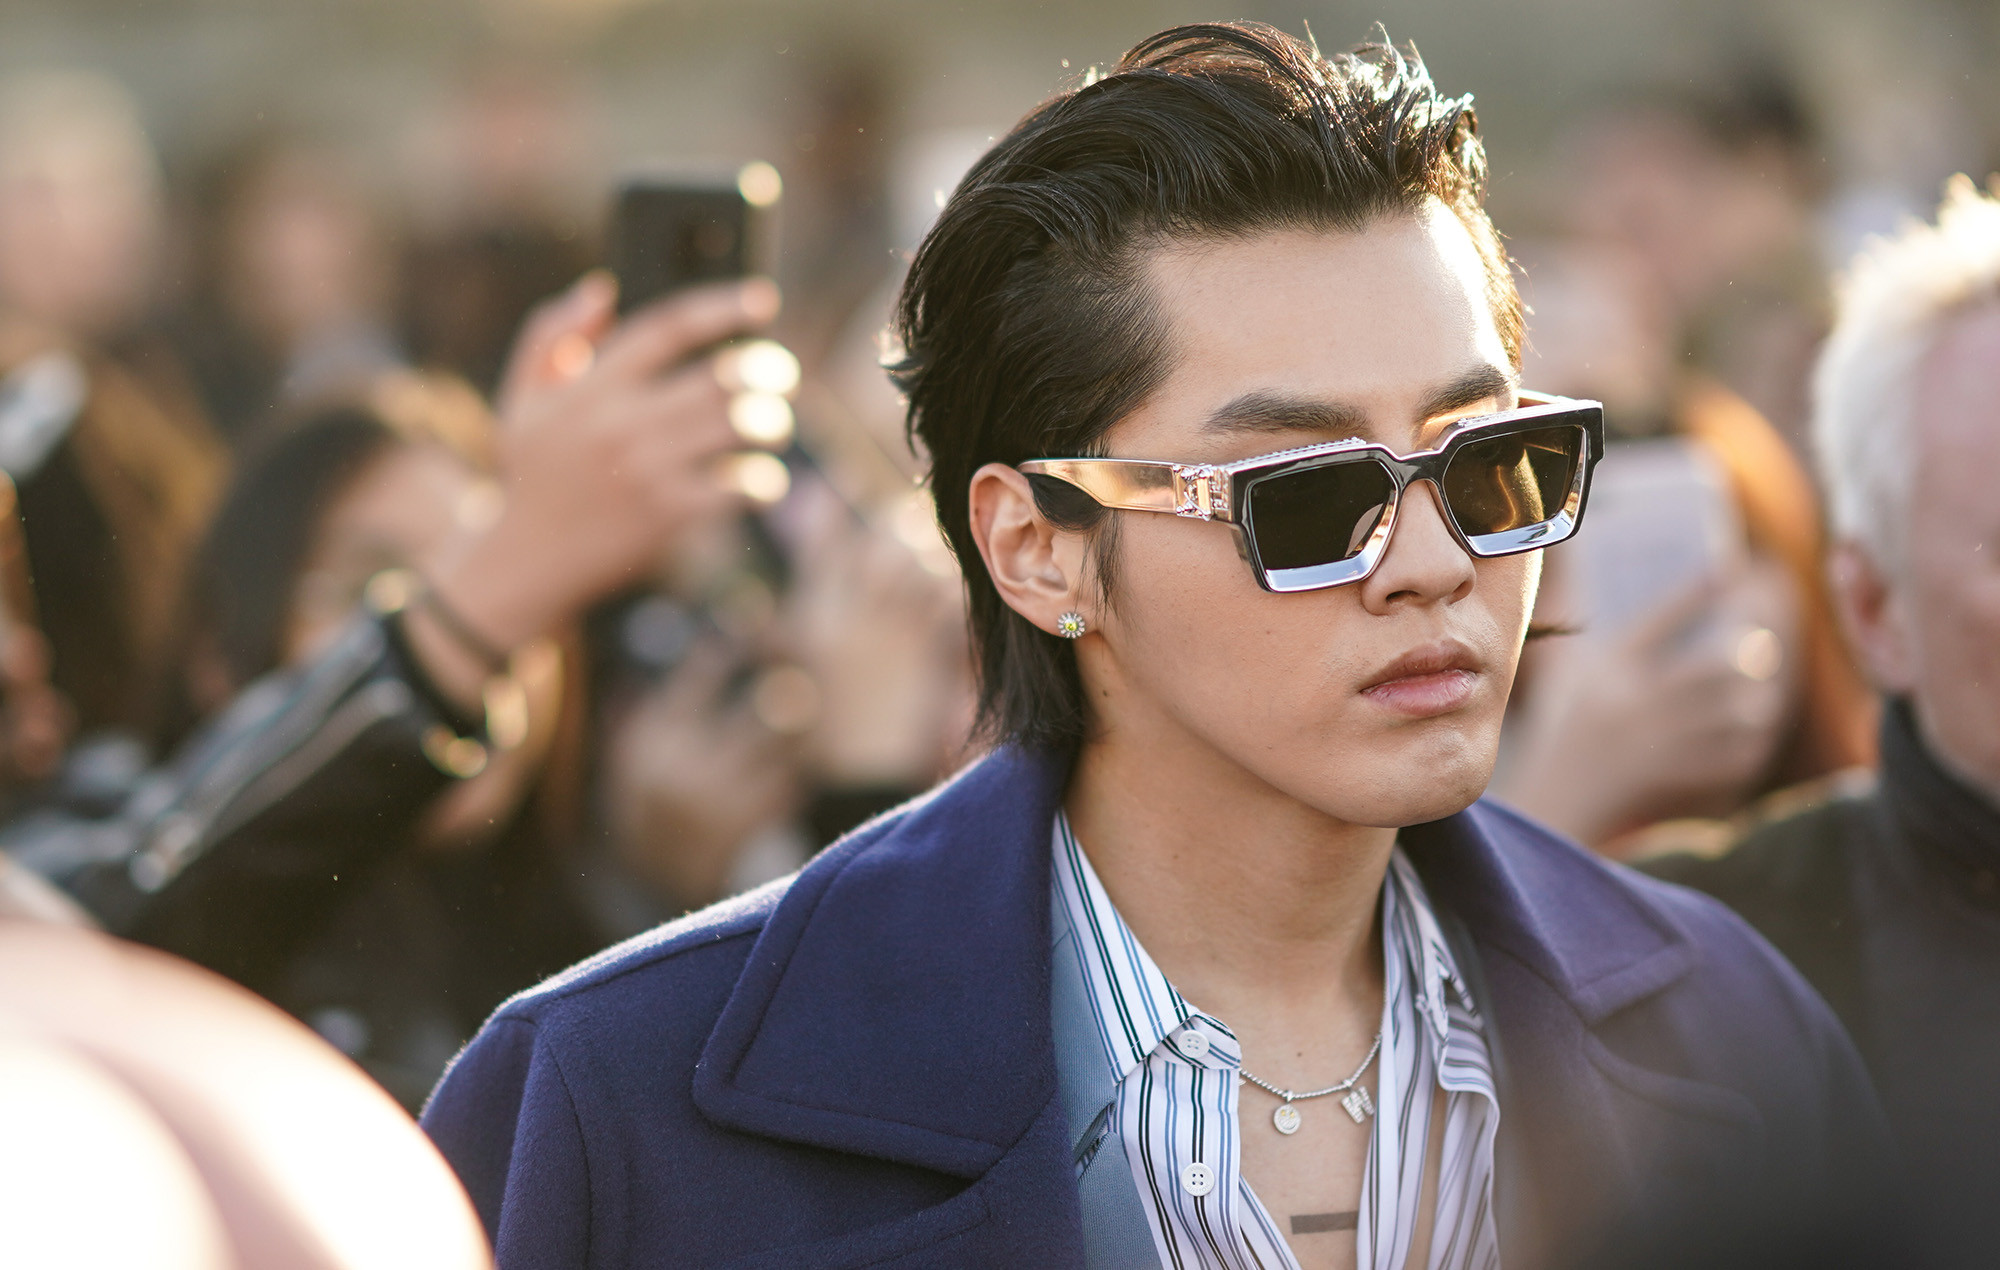 Kris Wu: Chinese-Canadian pop star sentenced to 13 years of prison for rape  in China